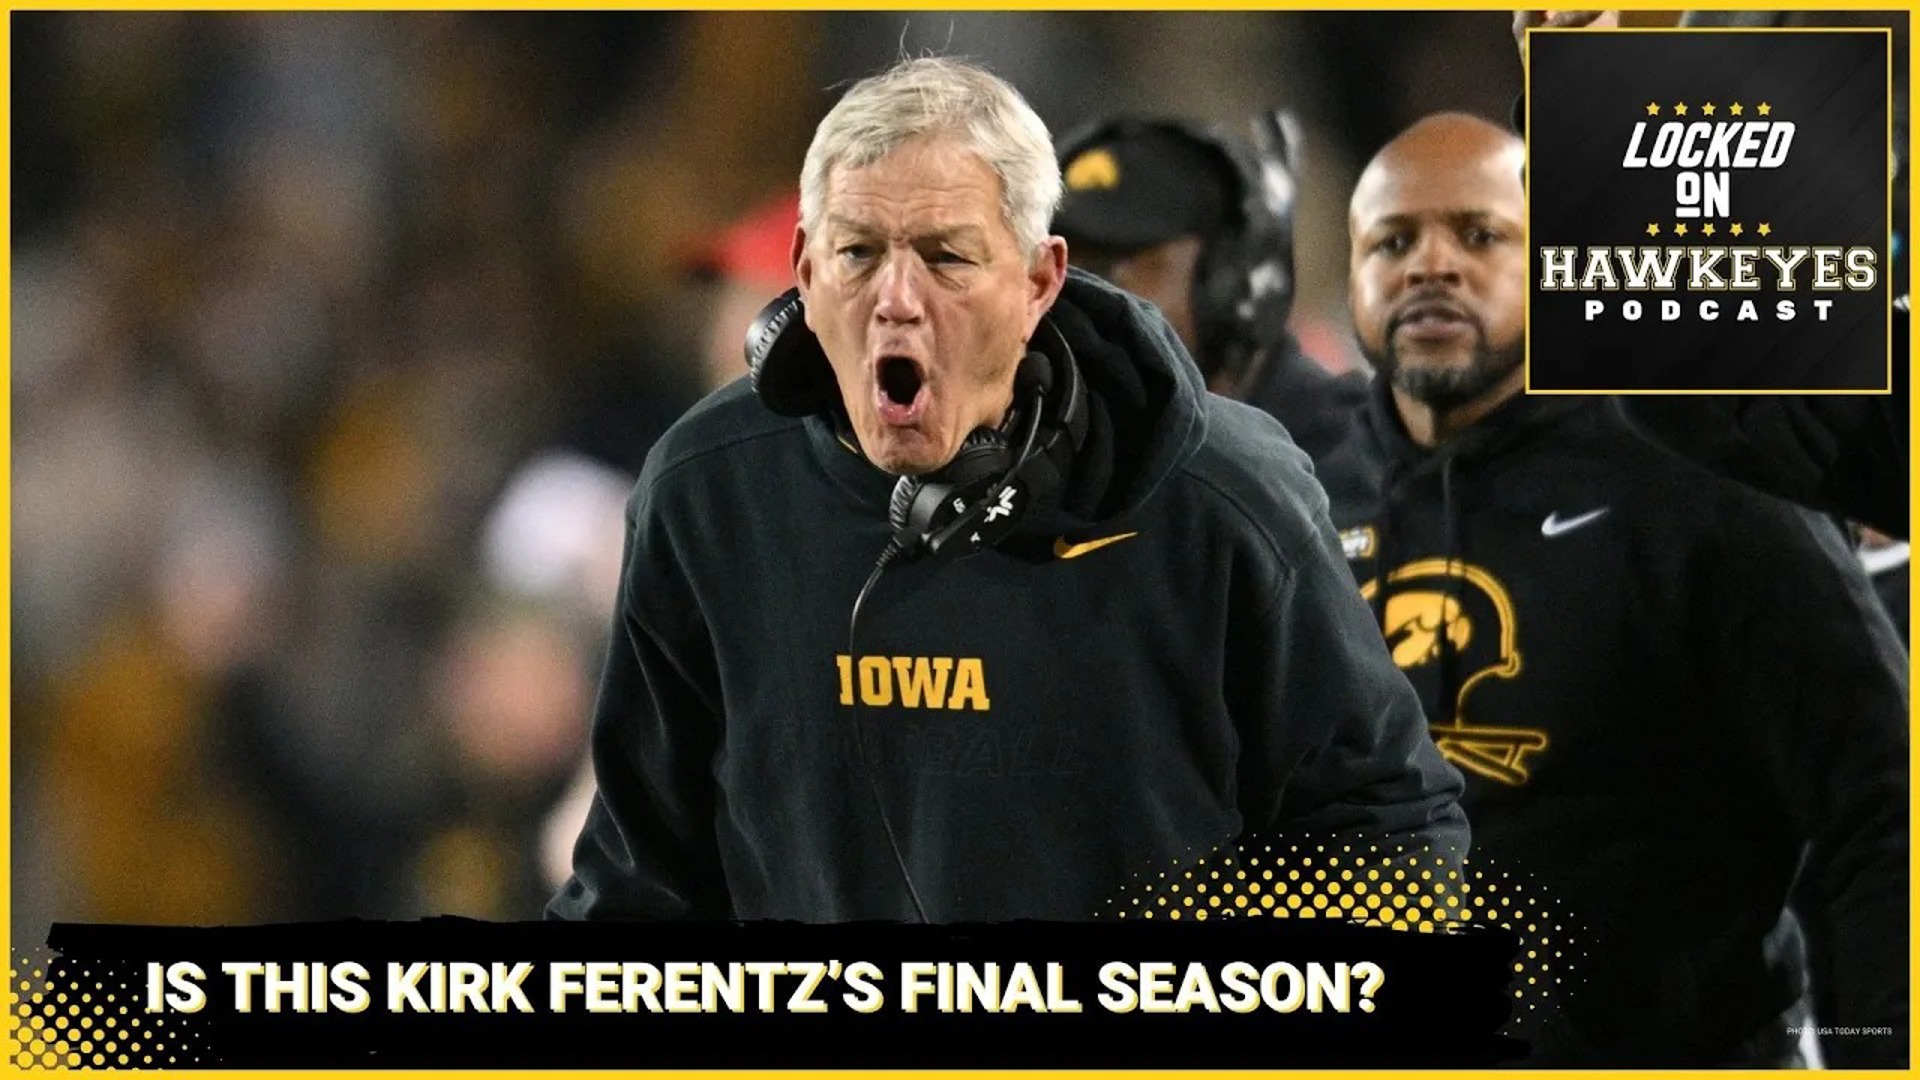 Trent Condon returns from vacation for another week of the Locked on Hawkeyes Podcast.